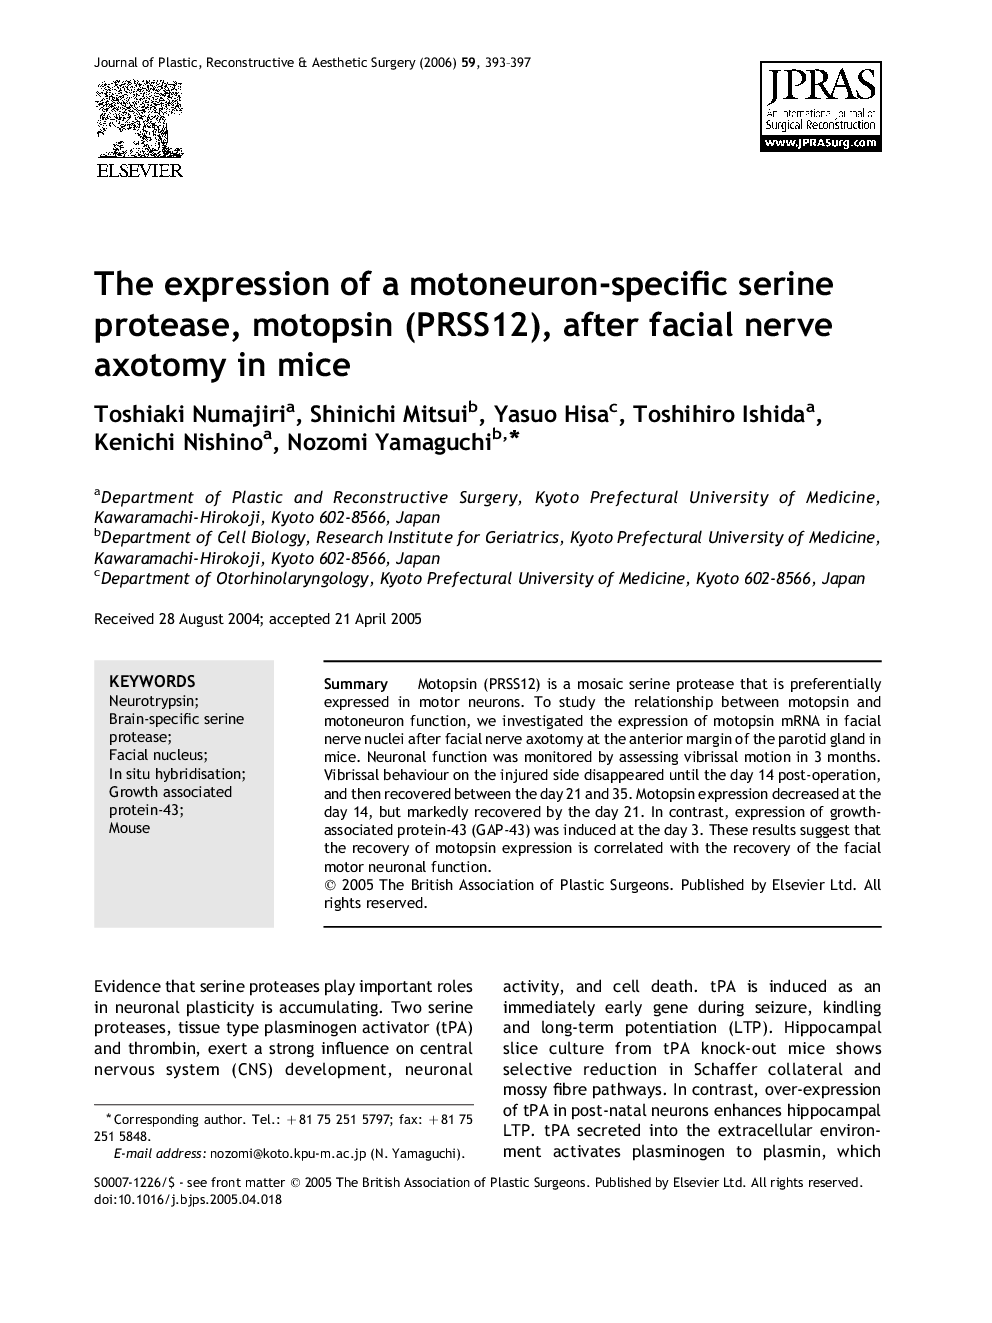 The expression of a motoneuron-specific serine protease, motopsin (PRSS12), after facial nerve axotomy in mice